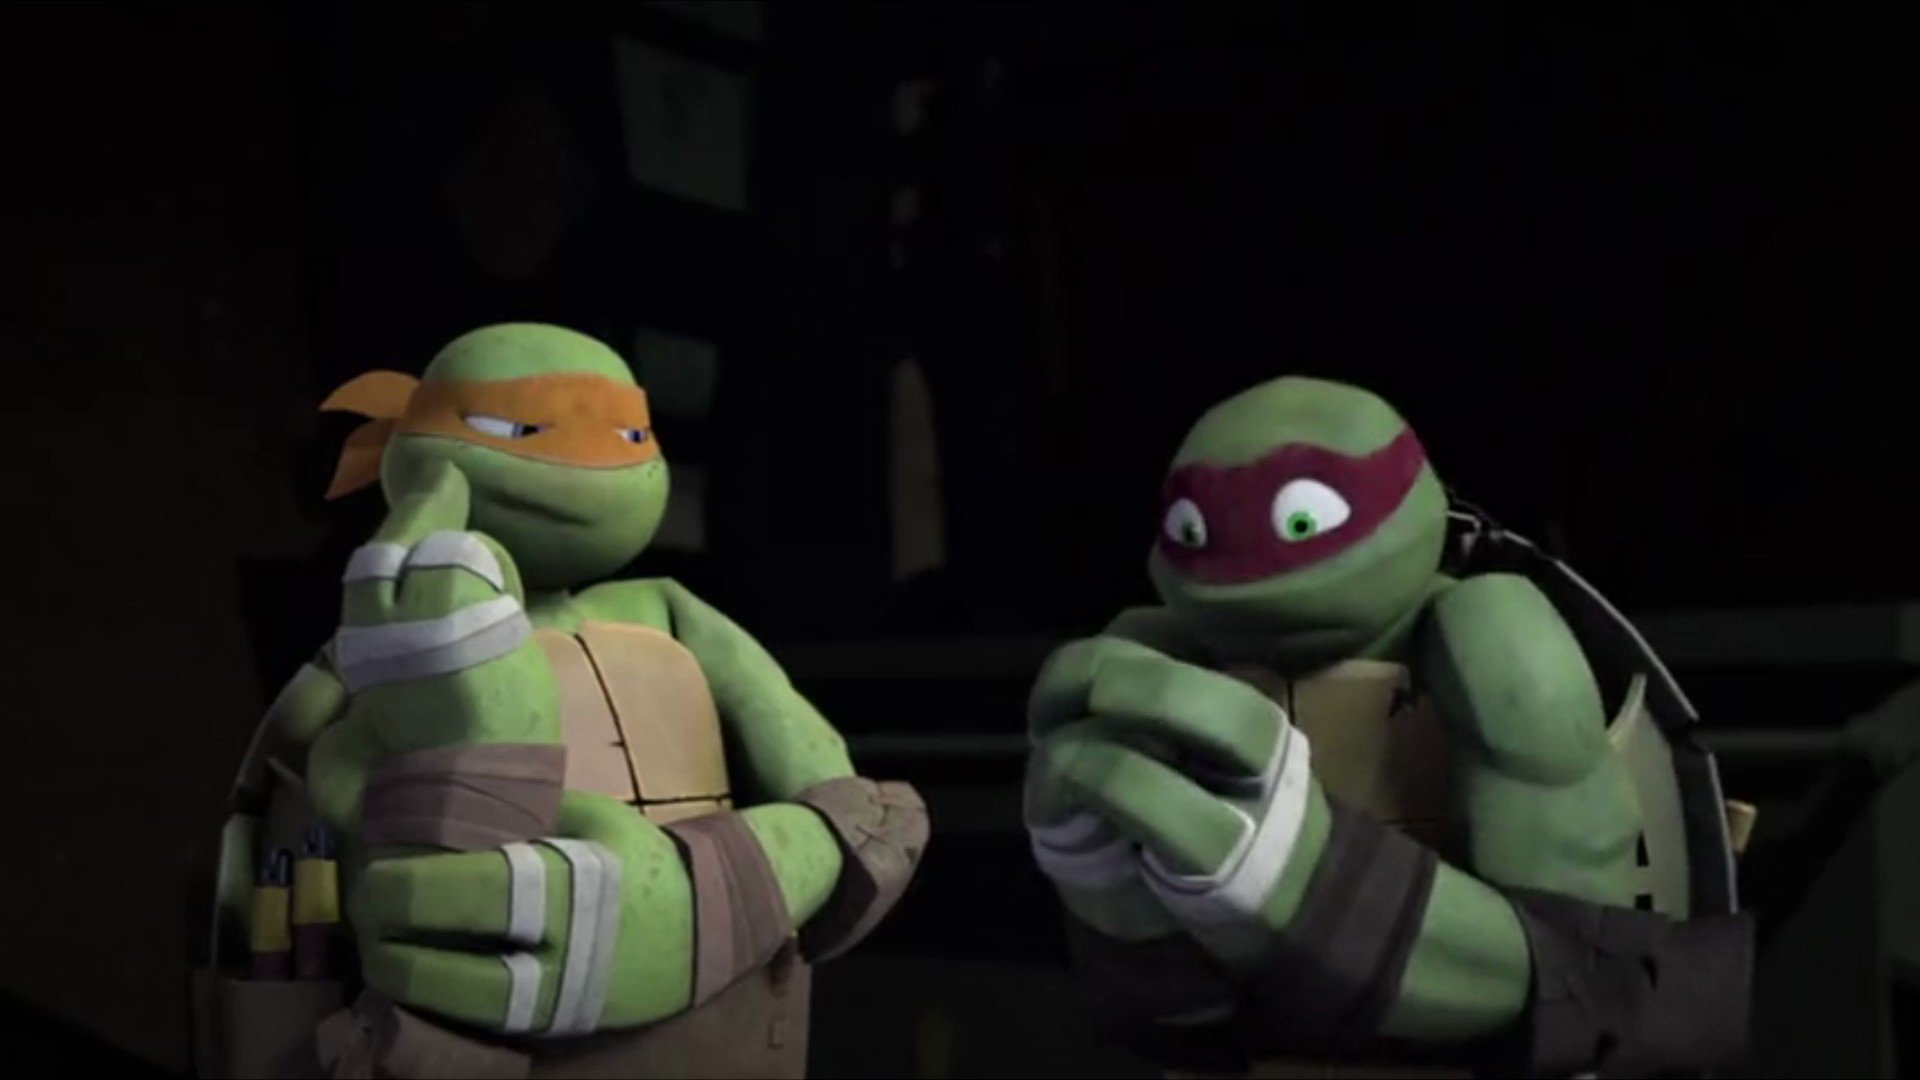 The TMNT 2012 Moments of all time (@rawtmnt2012) / X